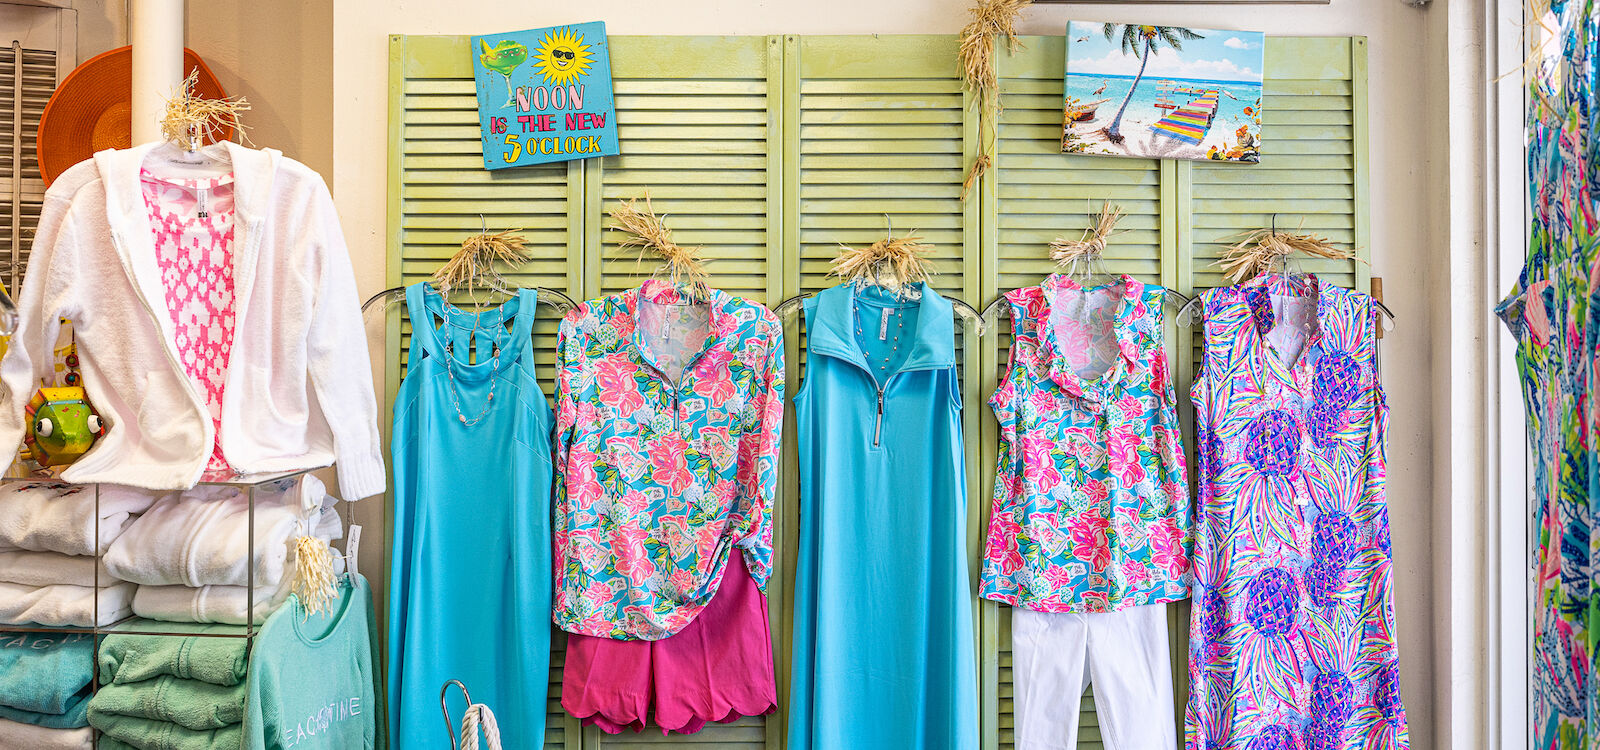 Brightly colored women's dresses, shirts, and skirts hang on a shop wall in Naples, Florida. Photo by Jennifer Brinkman